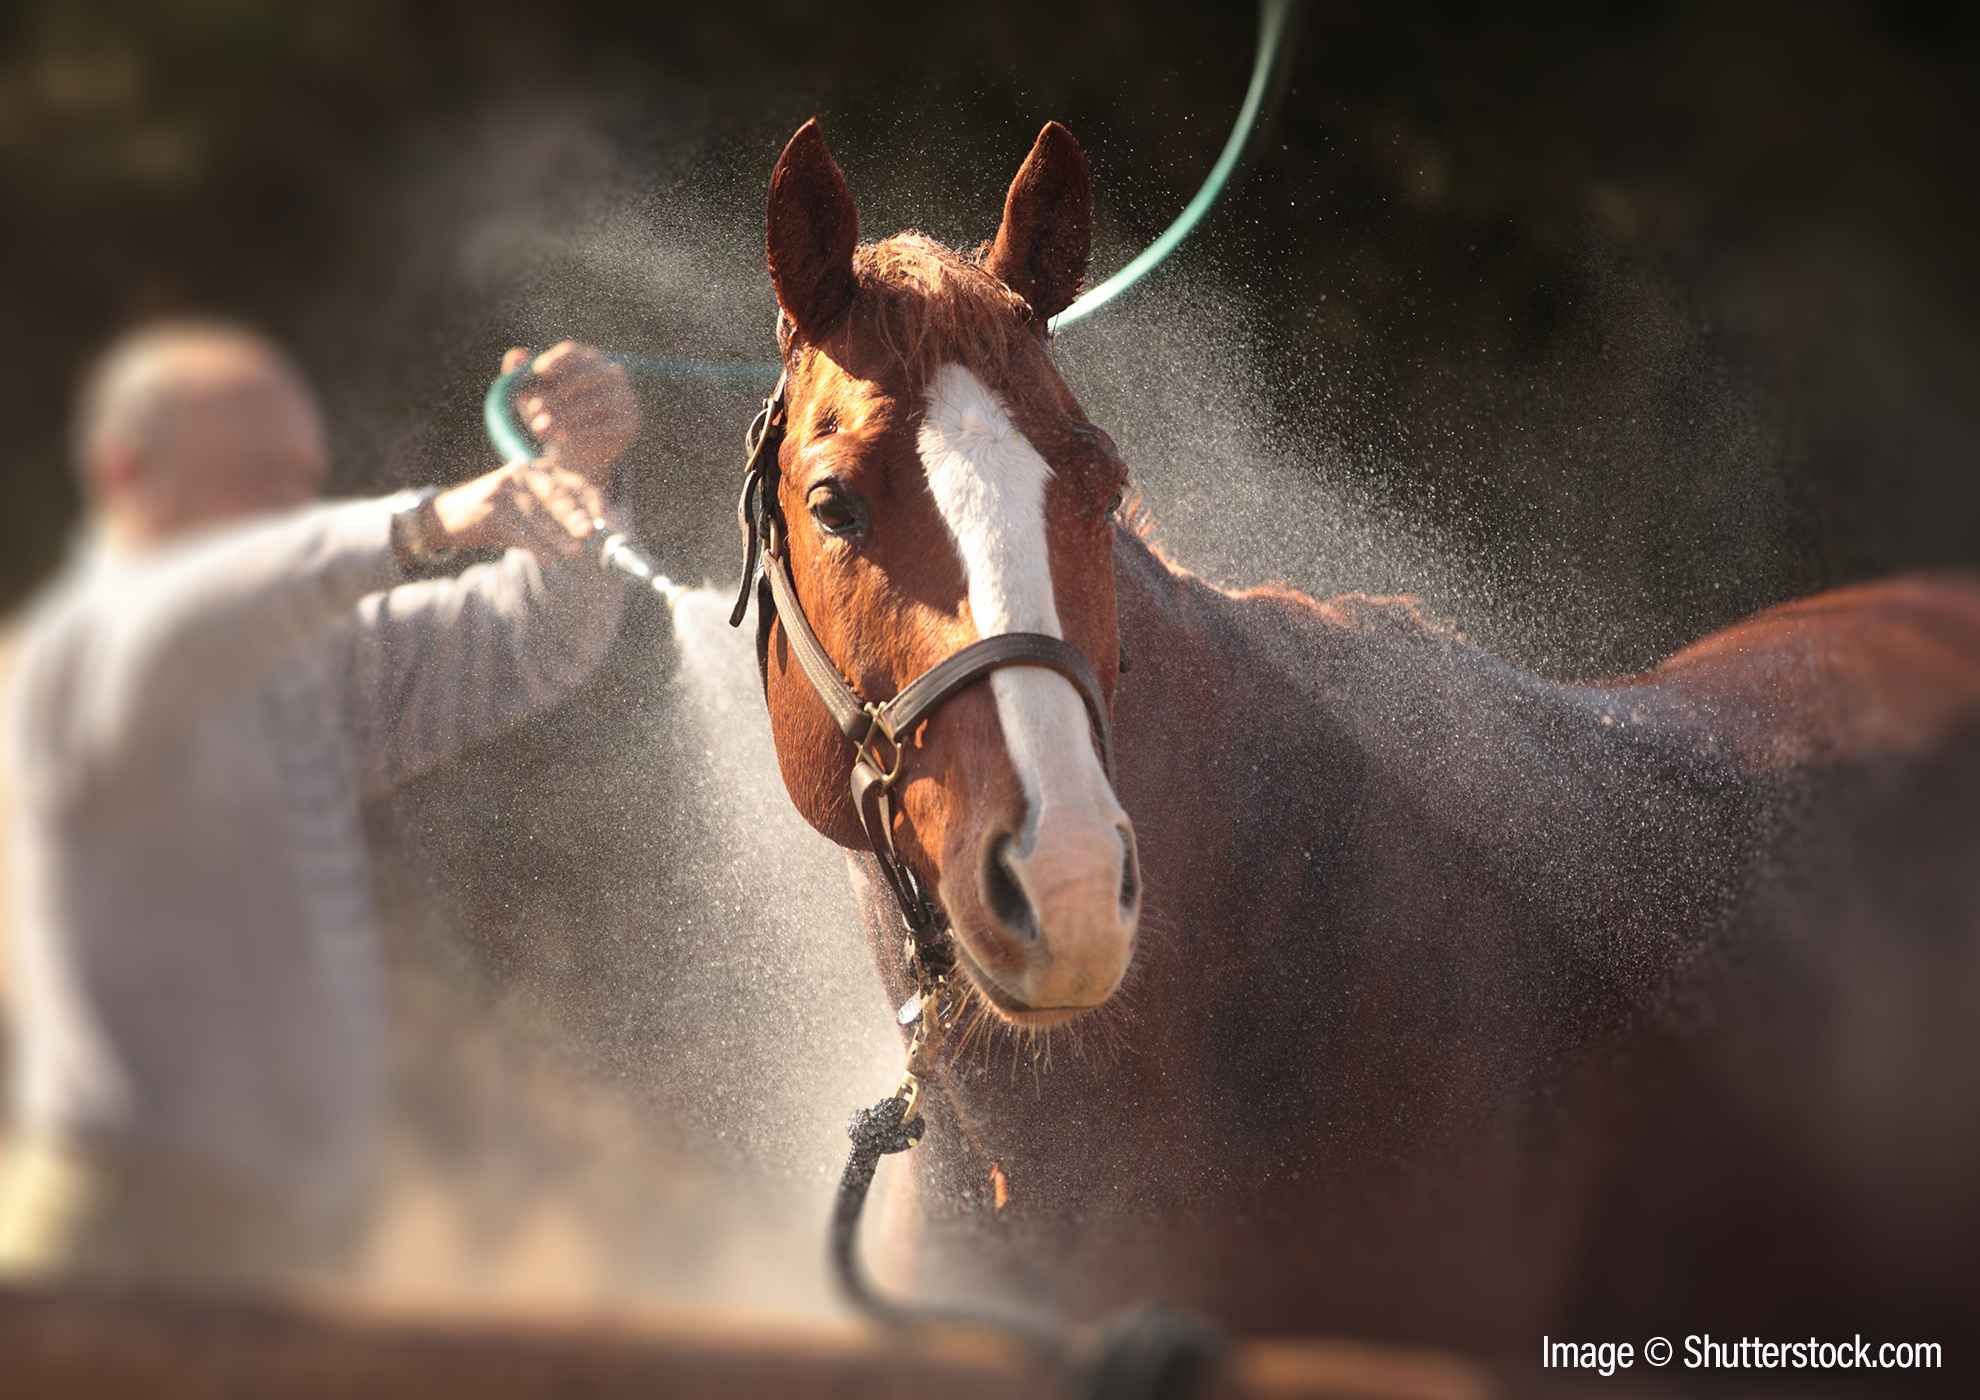 Managing your horse in hot weather